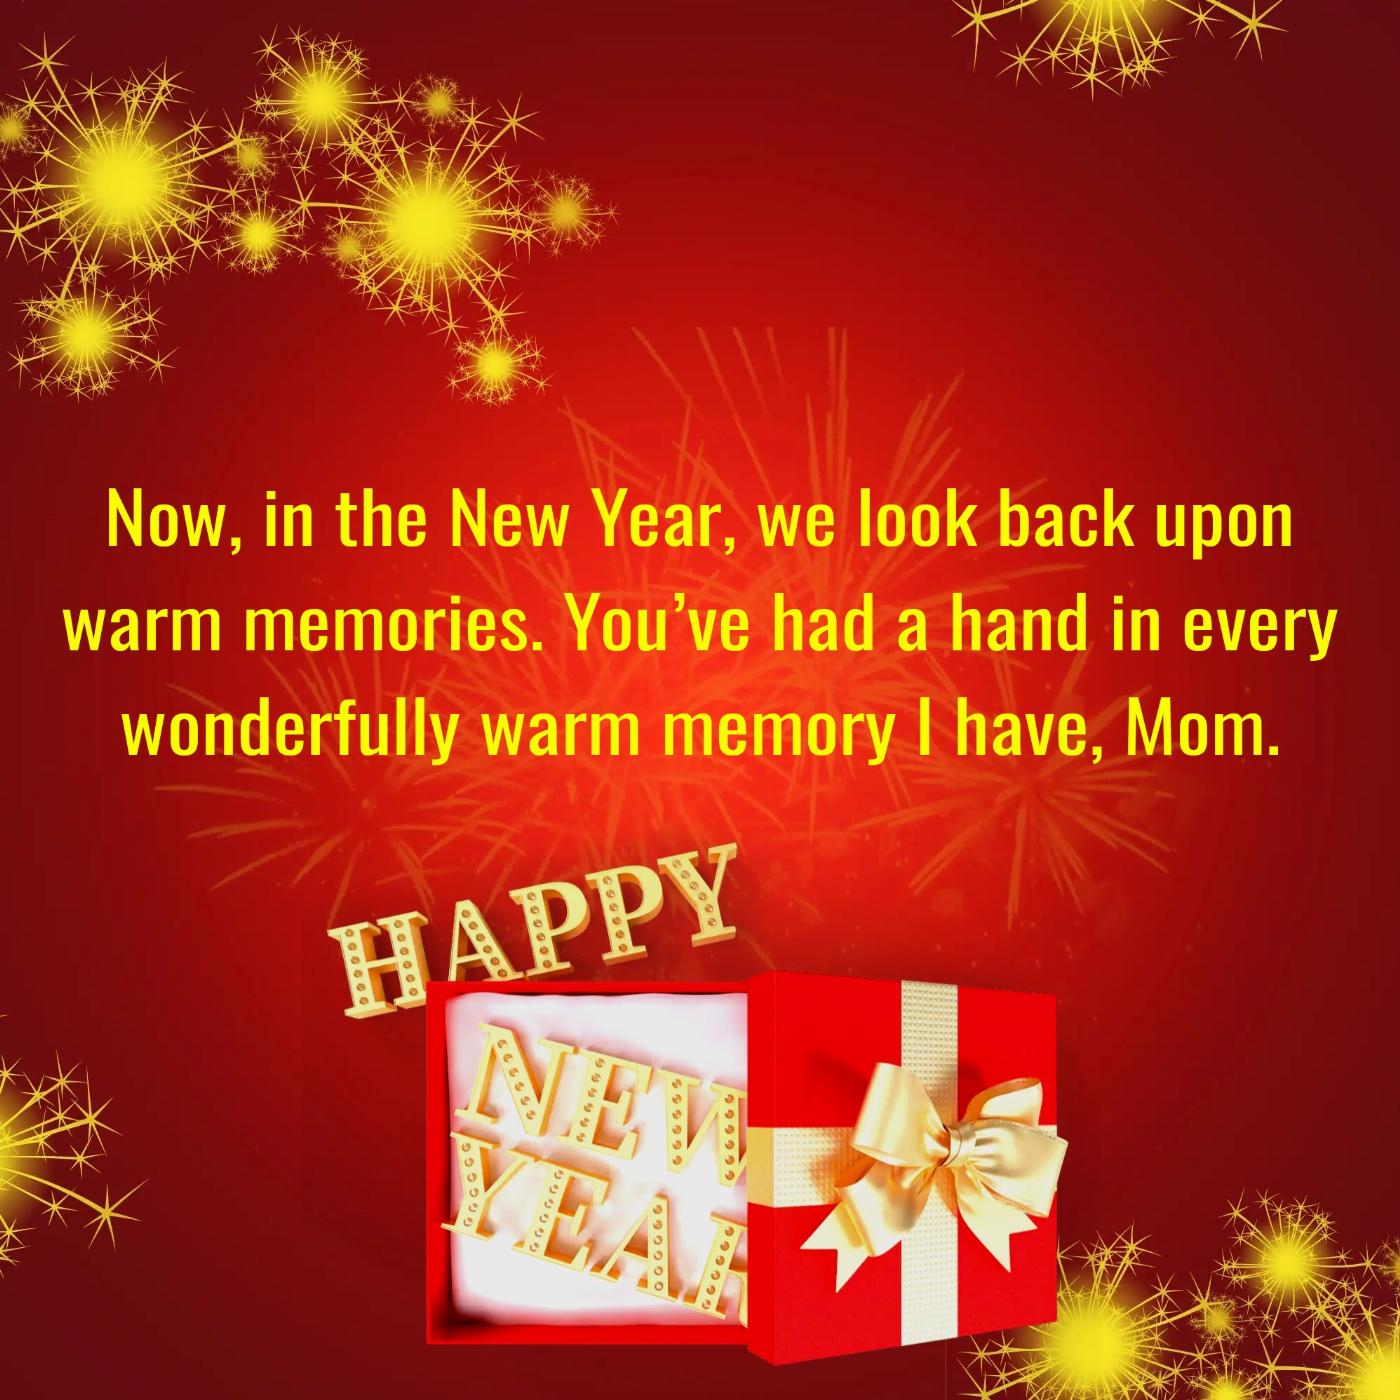 Now in the New Year we look back upon warm memories